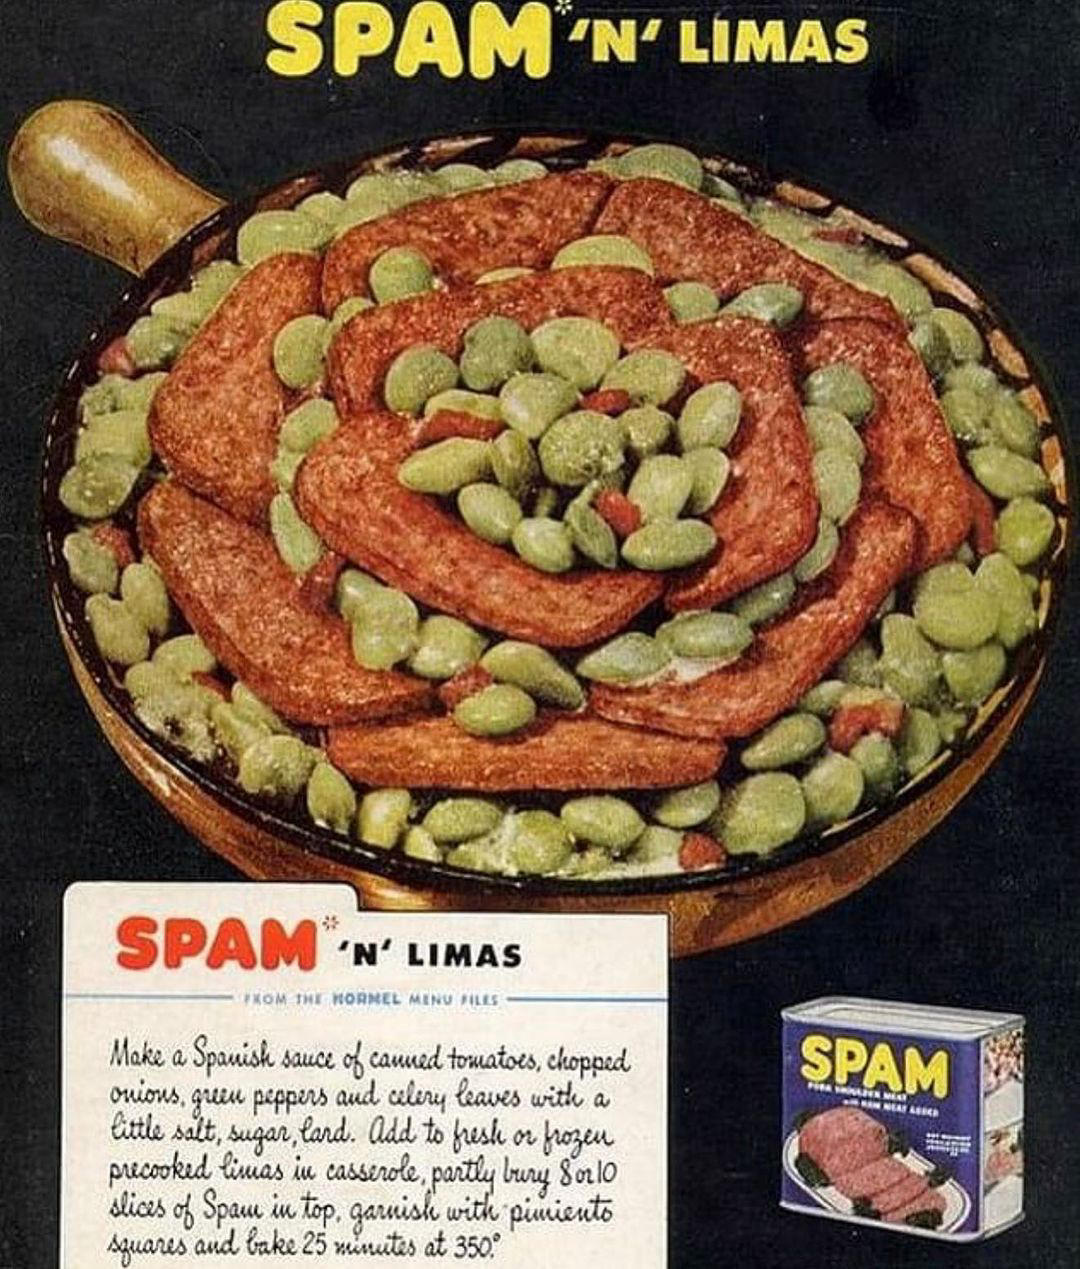 Here some food ideas from the 1970s